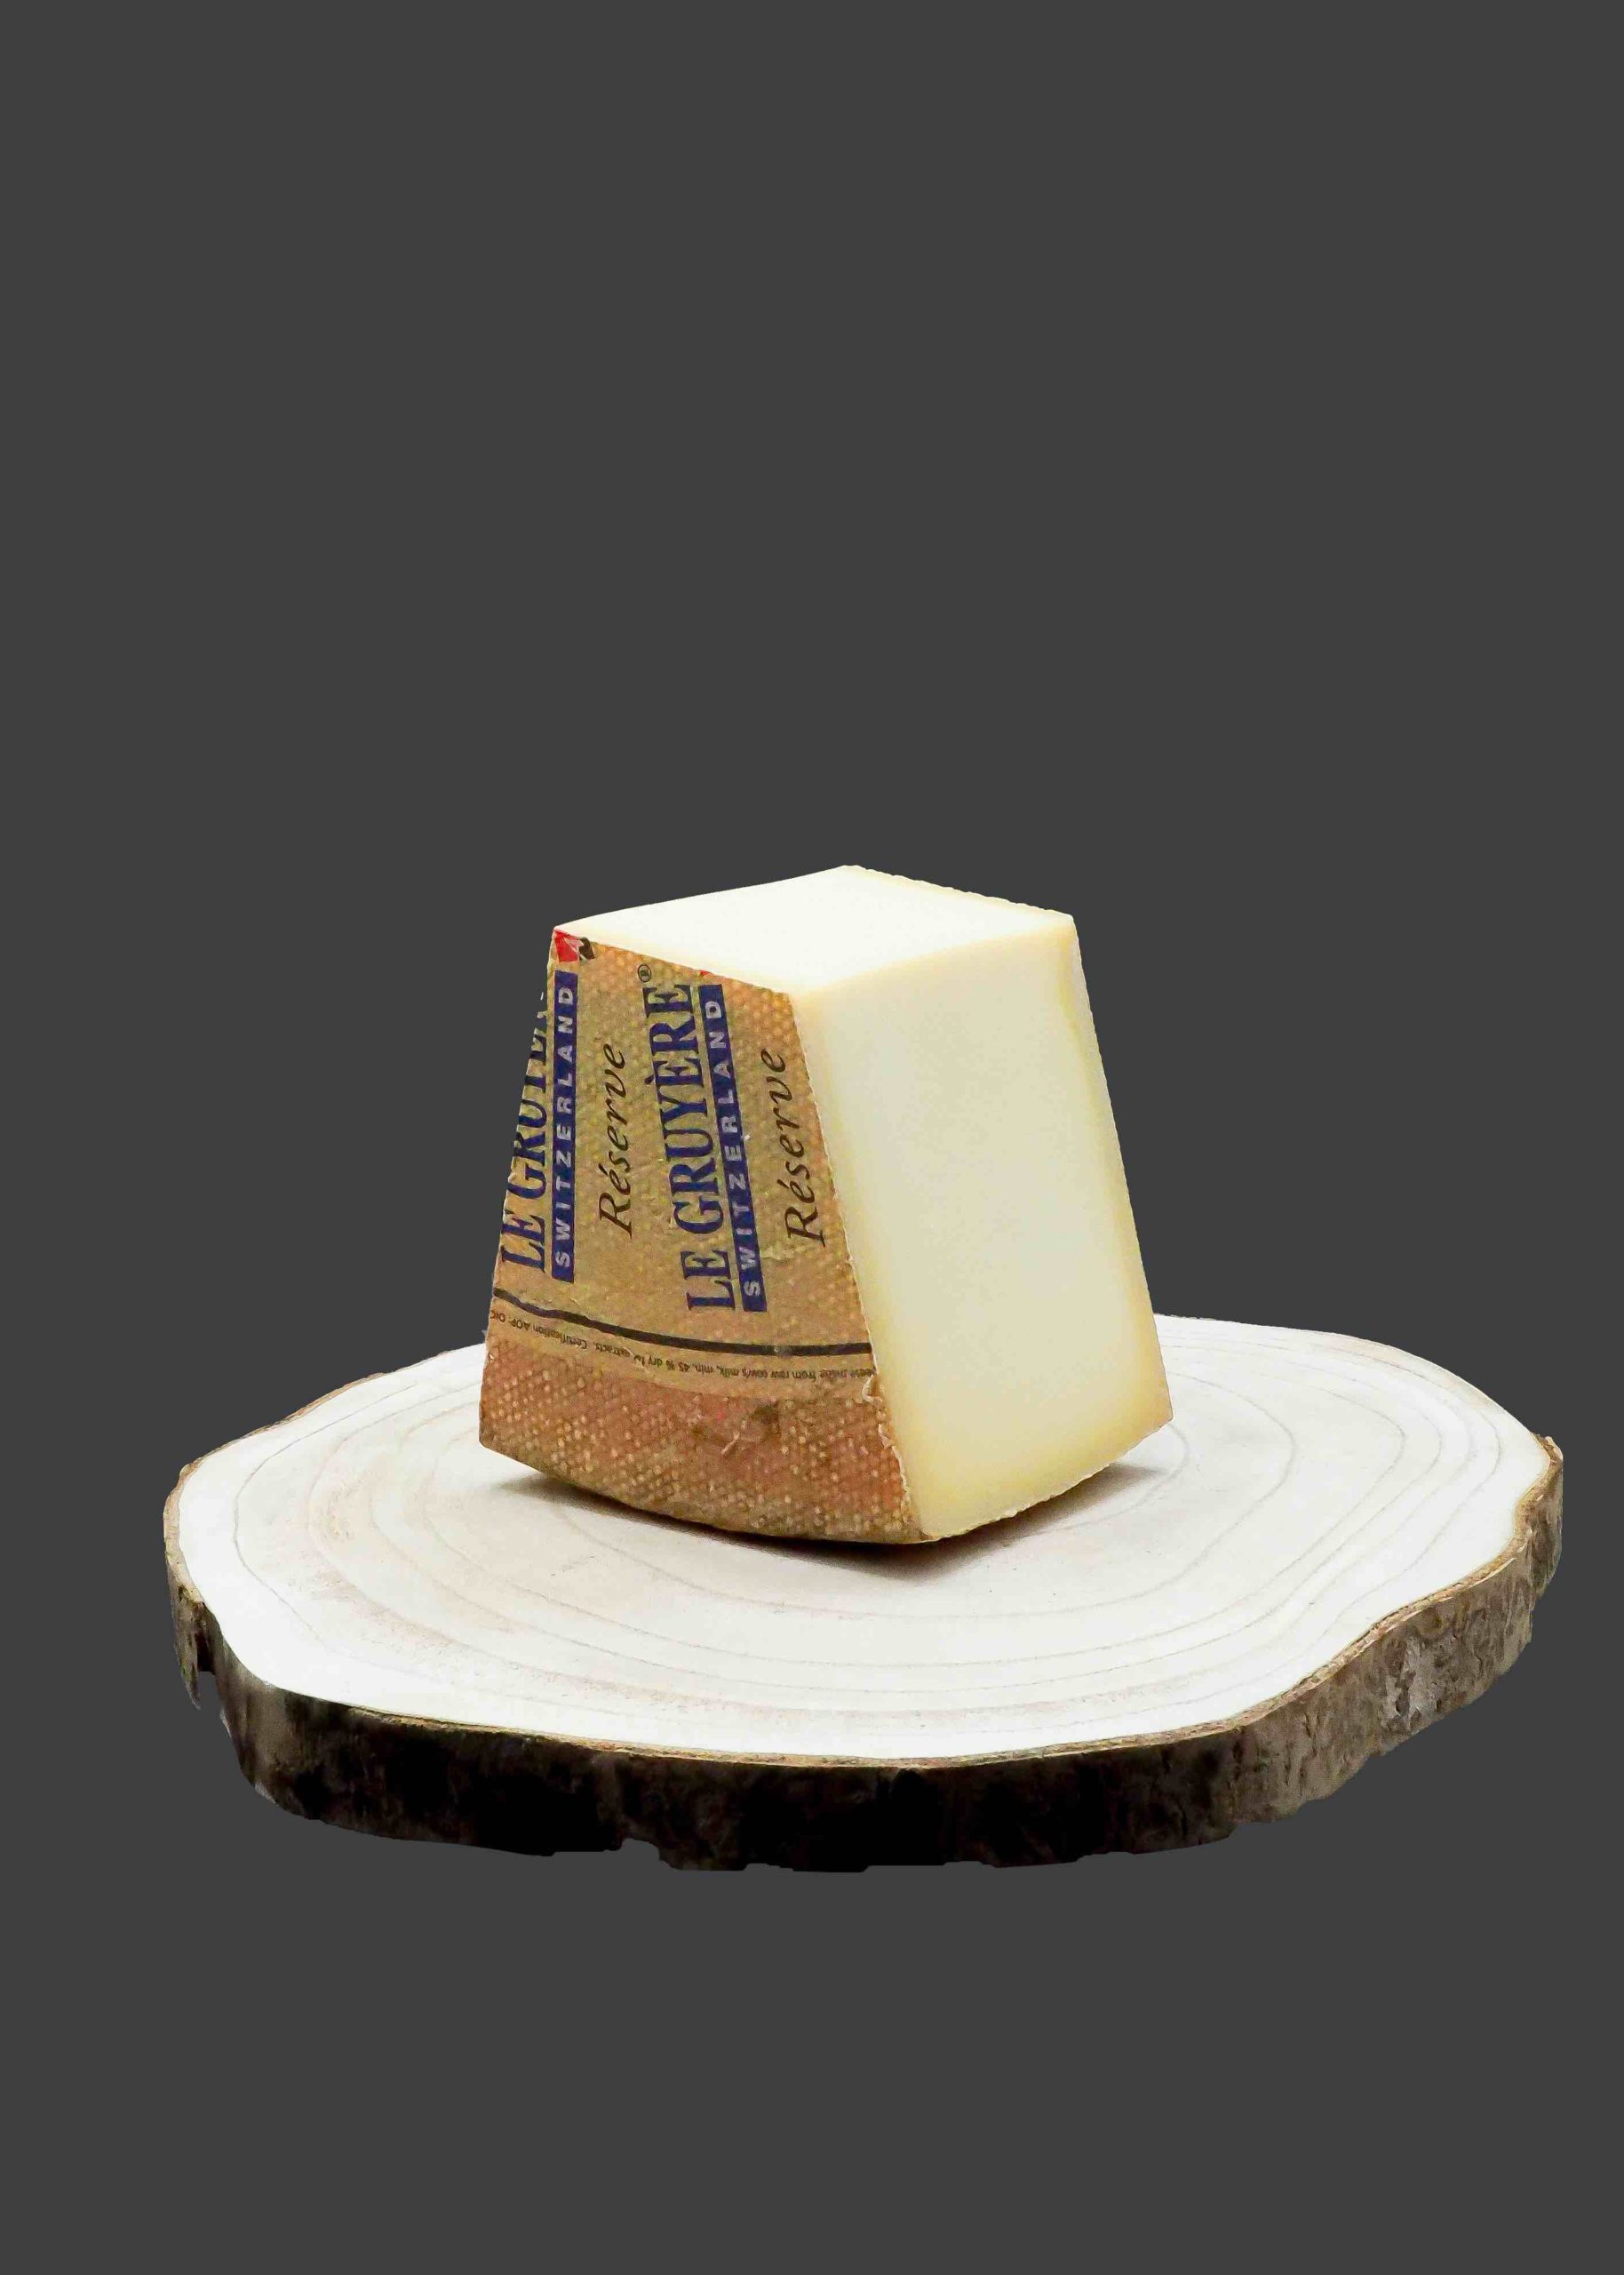 Gruyère • Fromage